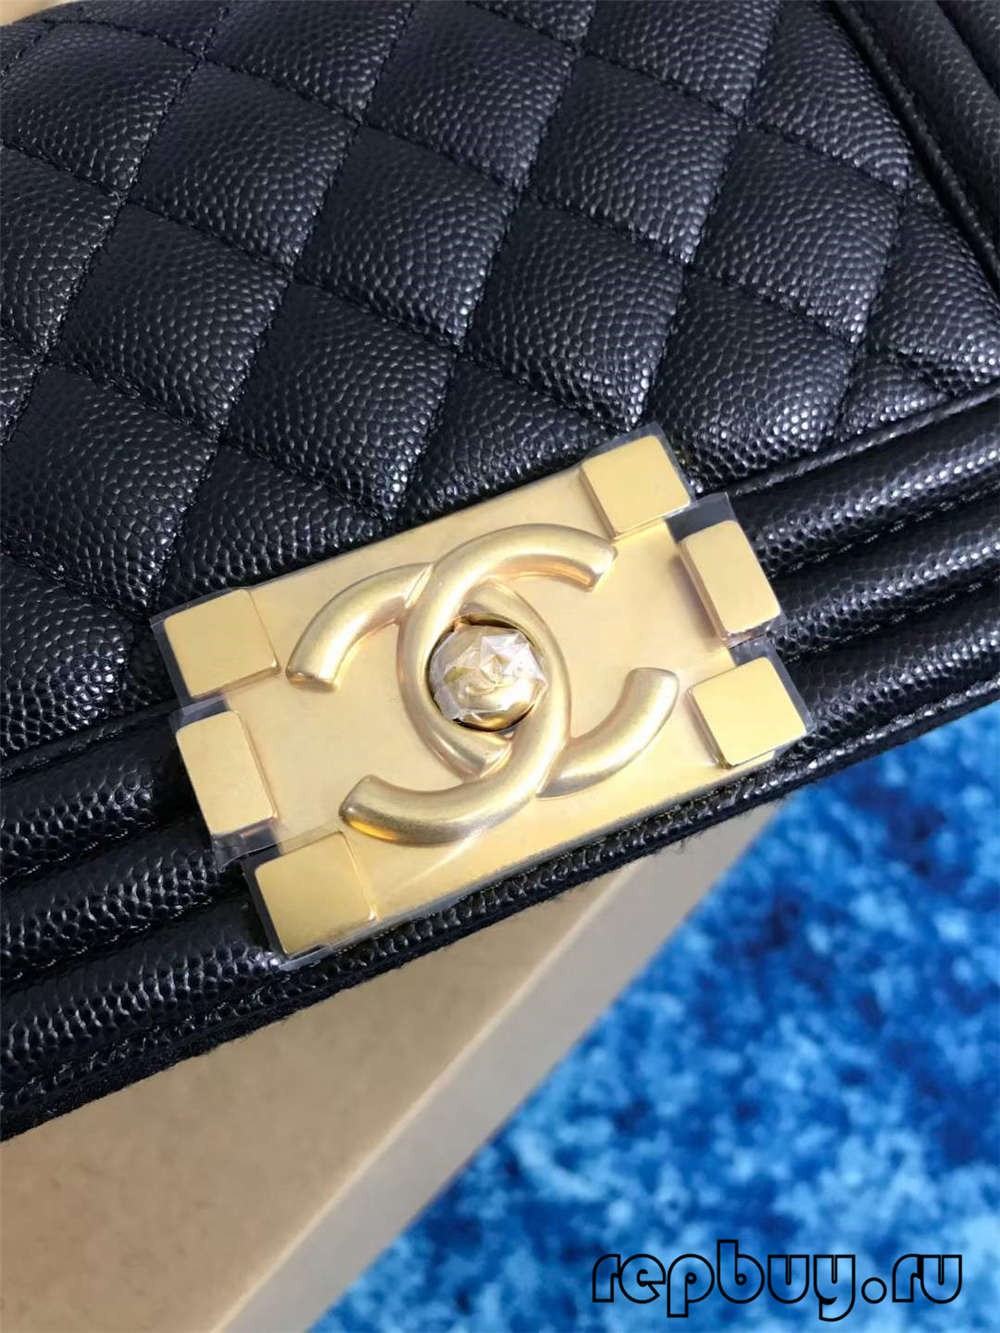 Chanel Leboy 4 top replica handbags gold buckle and silver buckle comparison (2022 Latest)-Best Quality Fake designer Bag Review, Replica designer bag ru